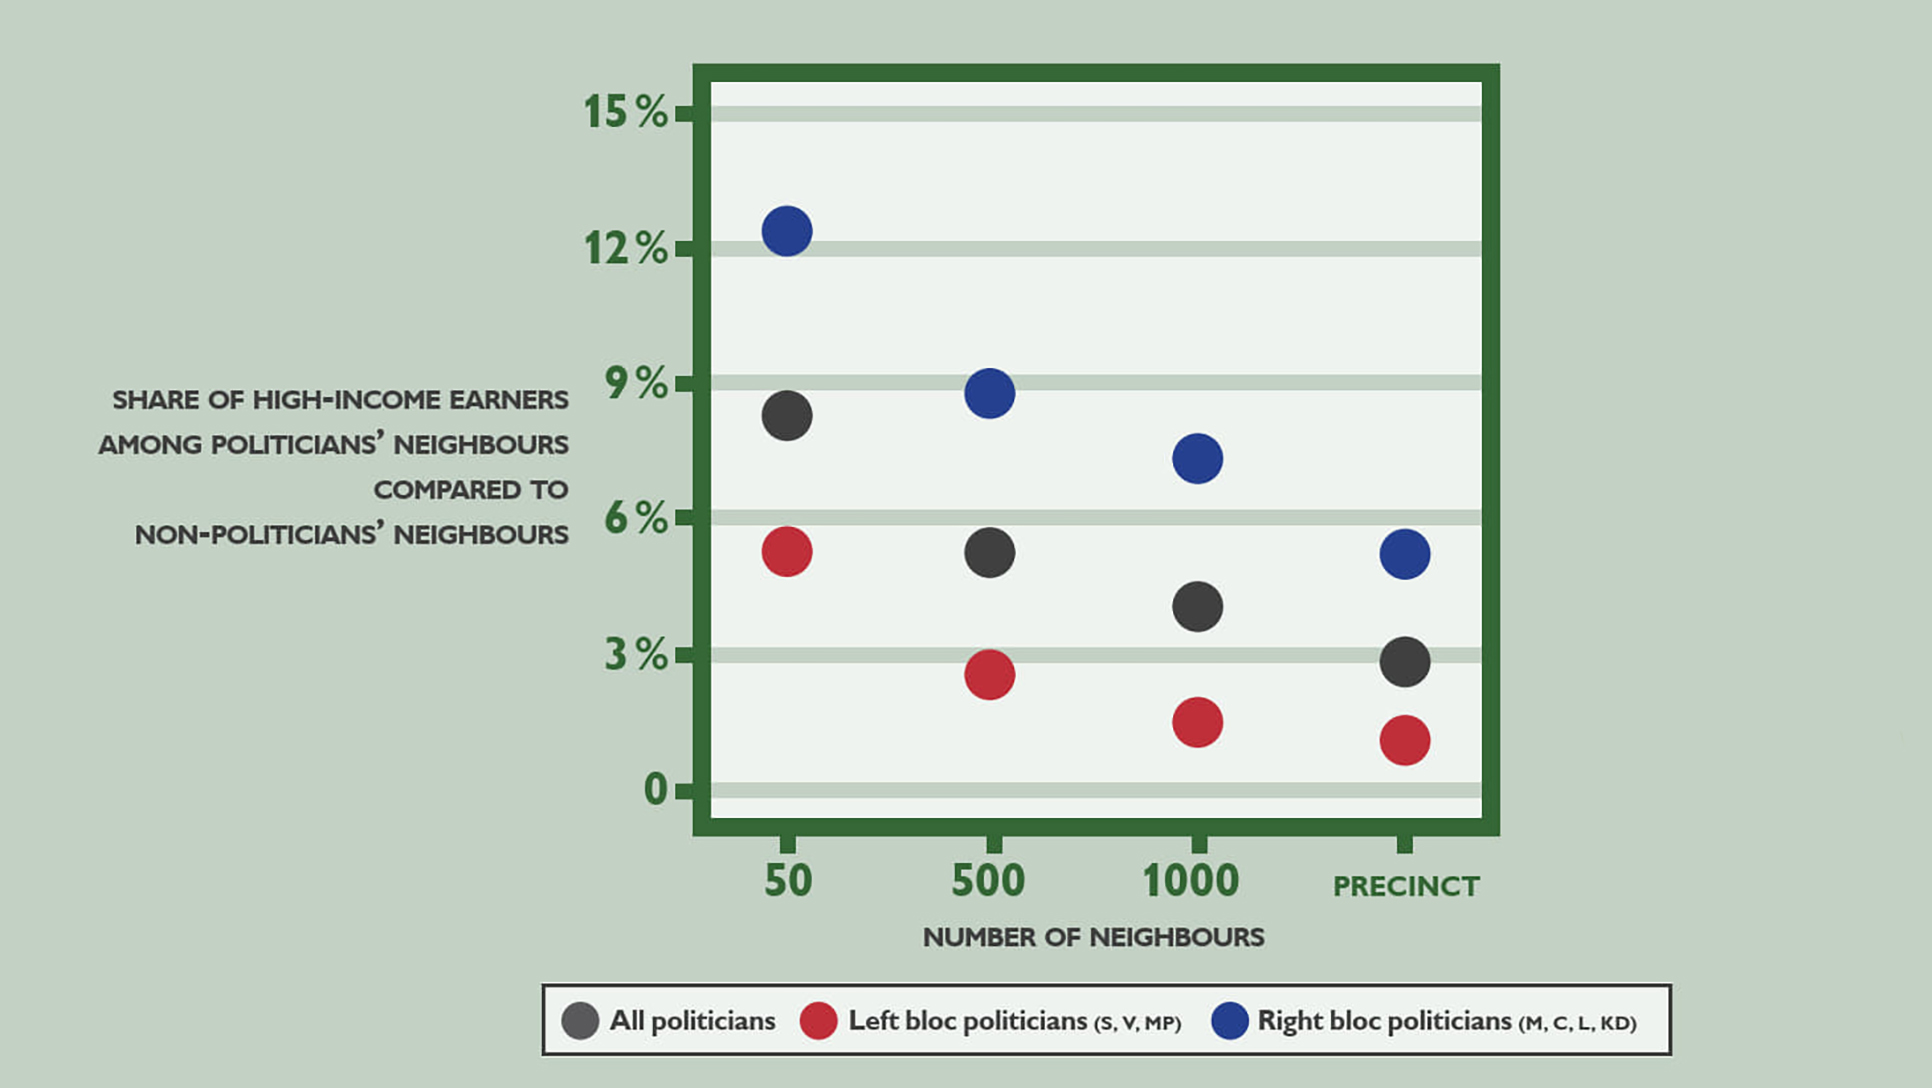 The graph shows that elected municipal politicians have a higher proportion of high-income earners among their neighbours in relation to the general population.